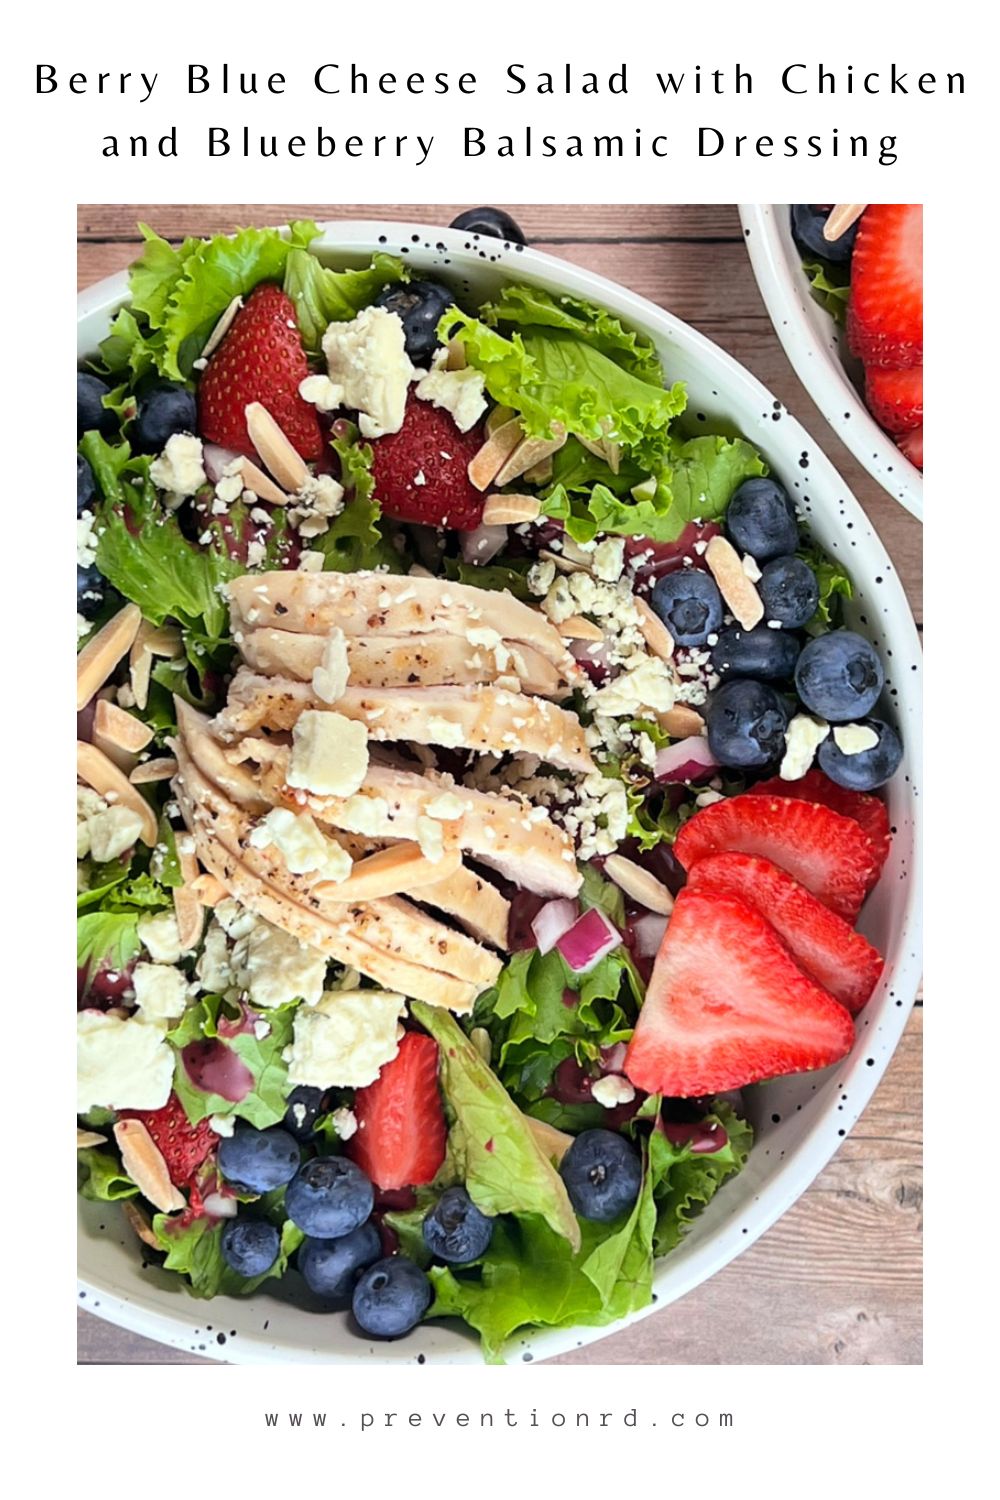 Berry Blue Cheese Salad with Chicken and Blueberry Balsamic Dressing via @preventionrd